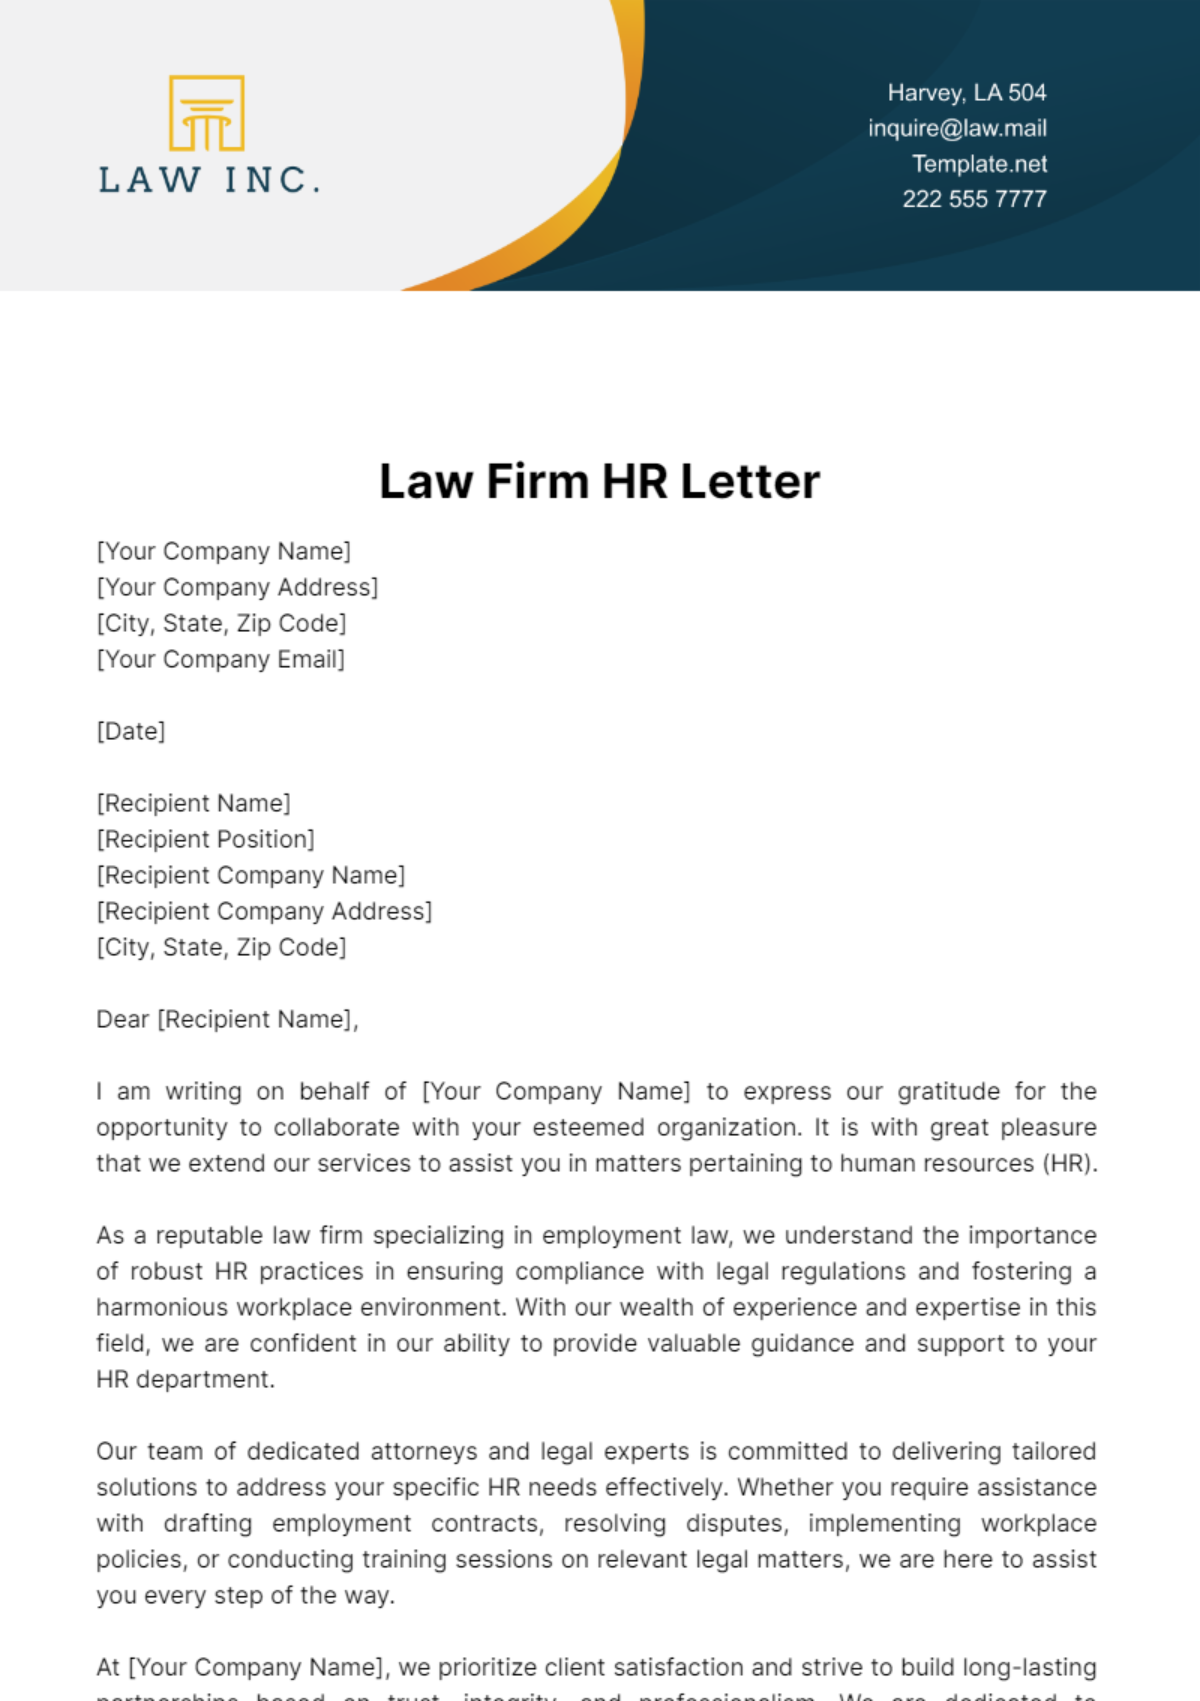 Free Law Firm HR Letter Template